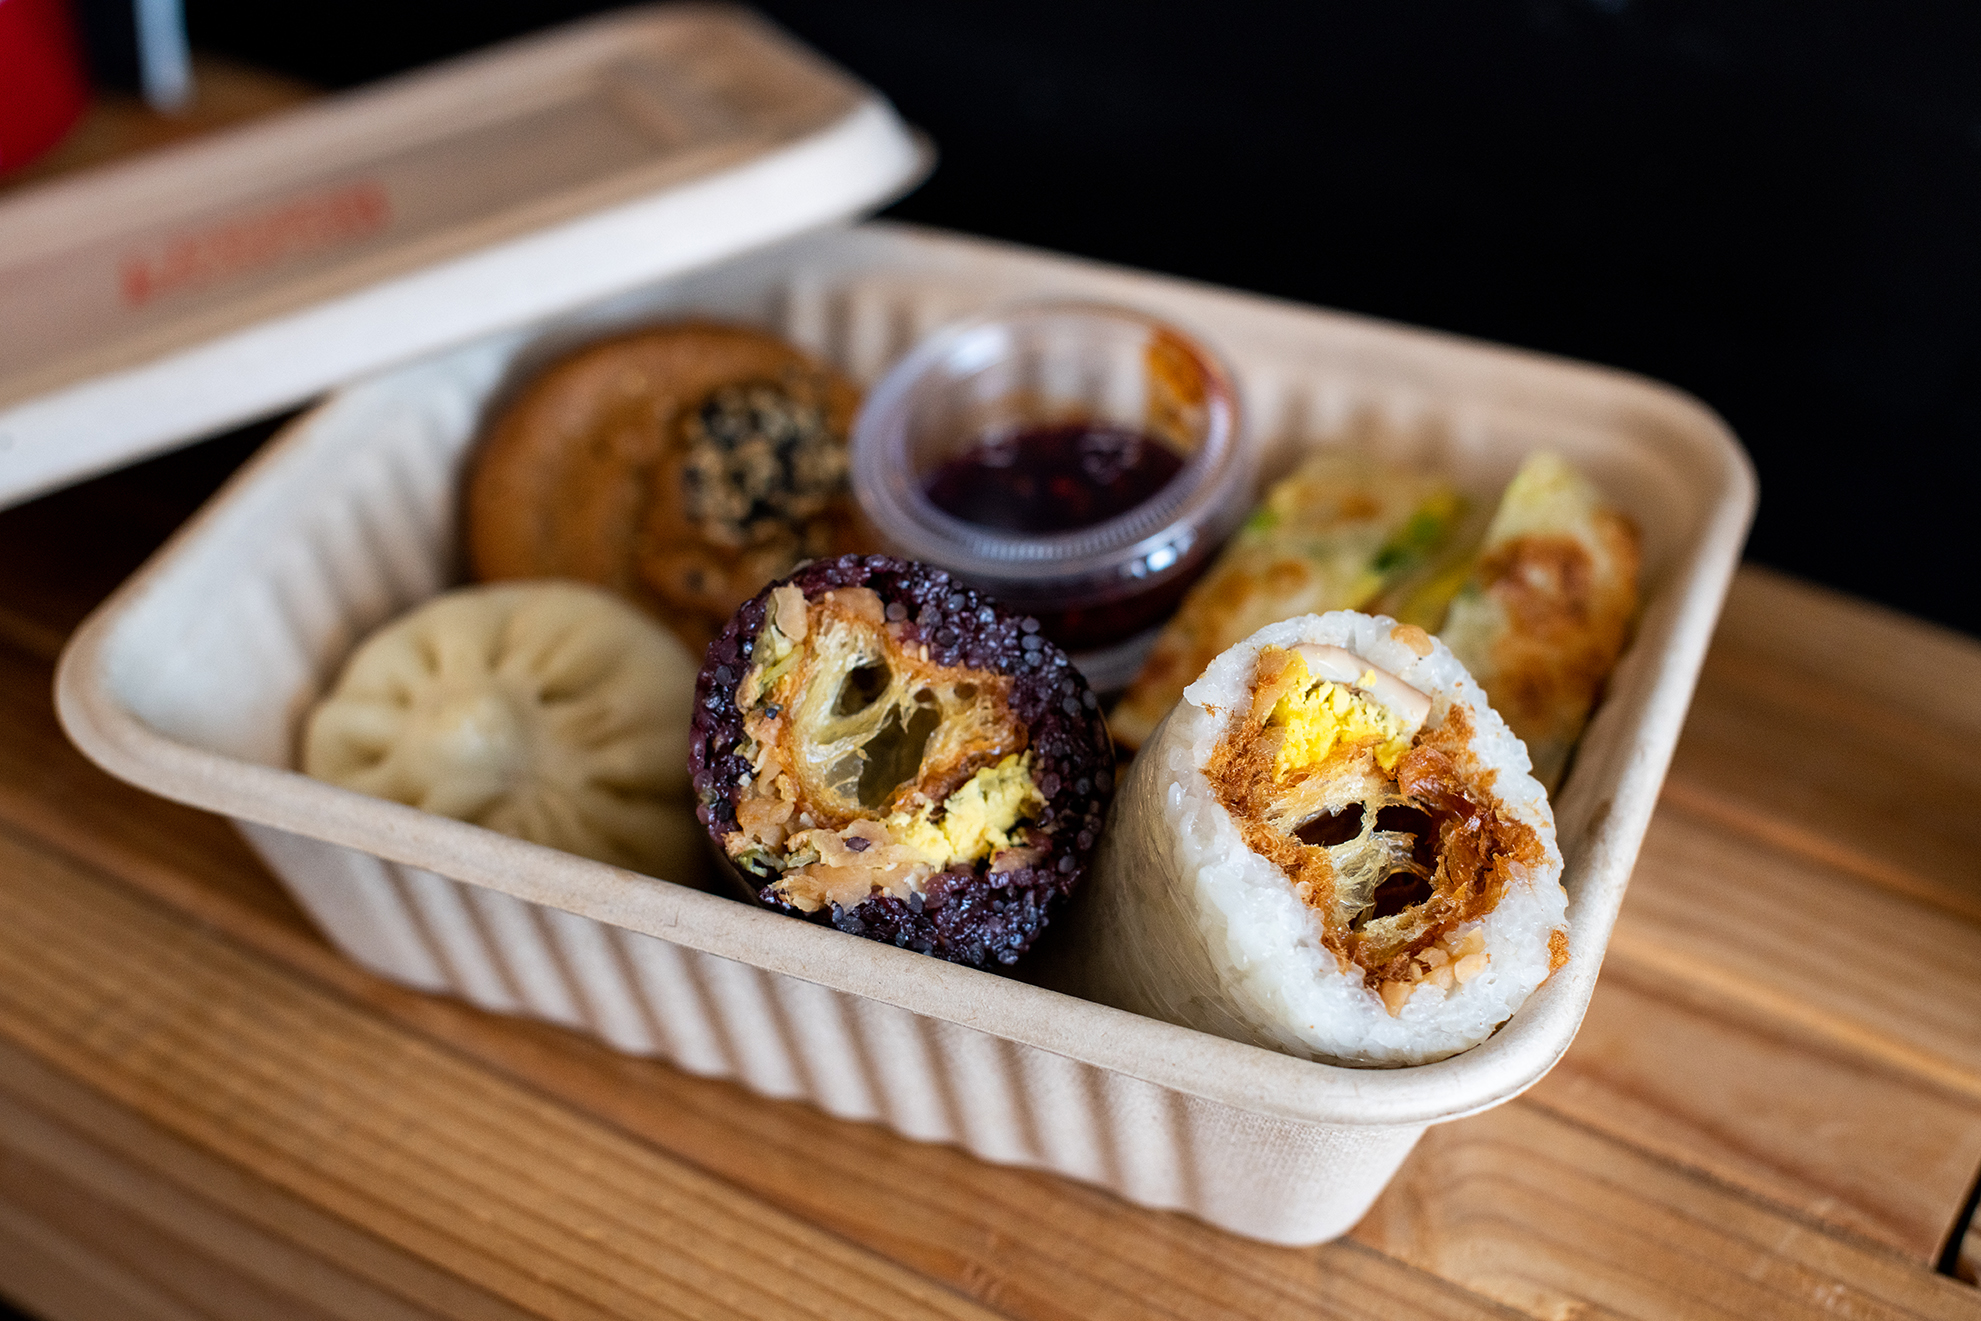 A takeout box with sticky rice rolls, scallion egg pancake, and other Taiwanese breakfast items from Taiwan Bento.